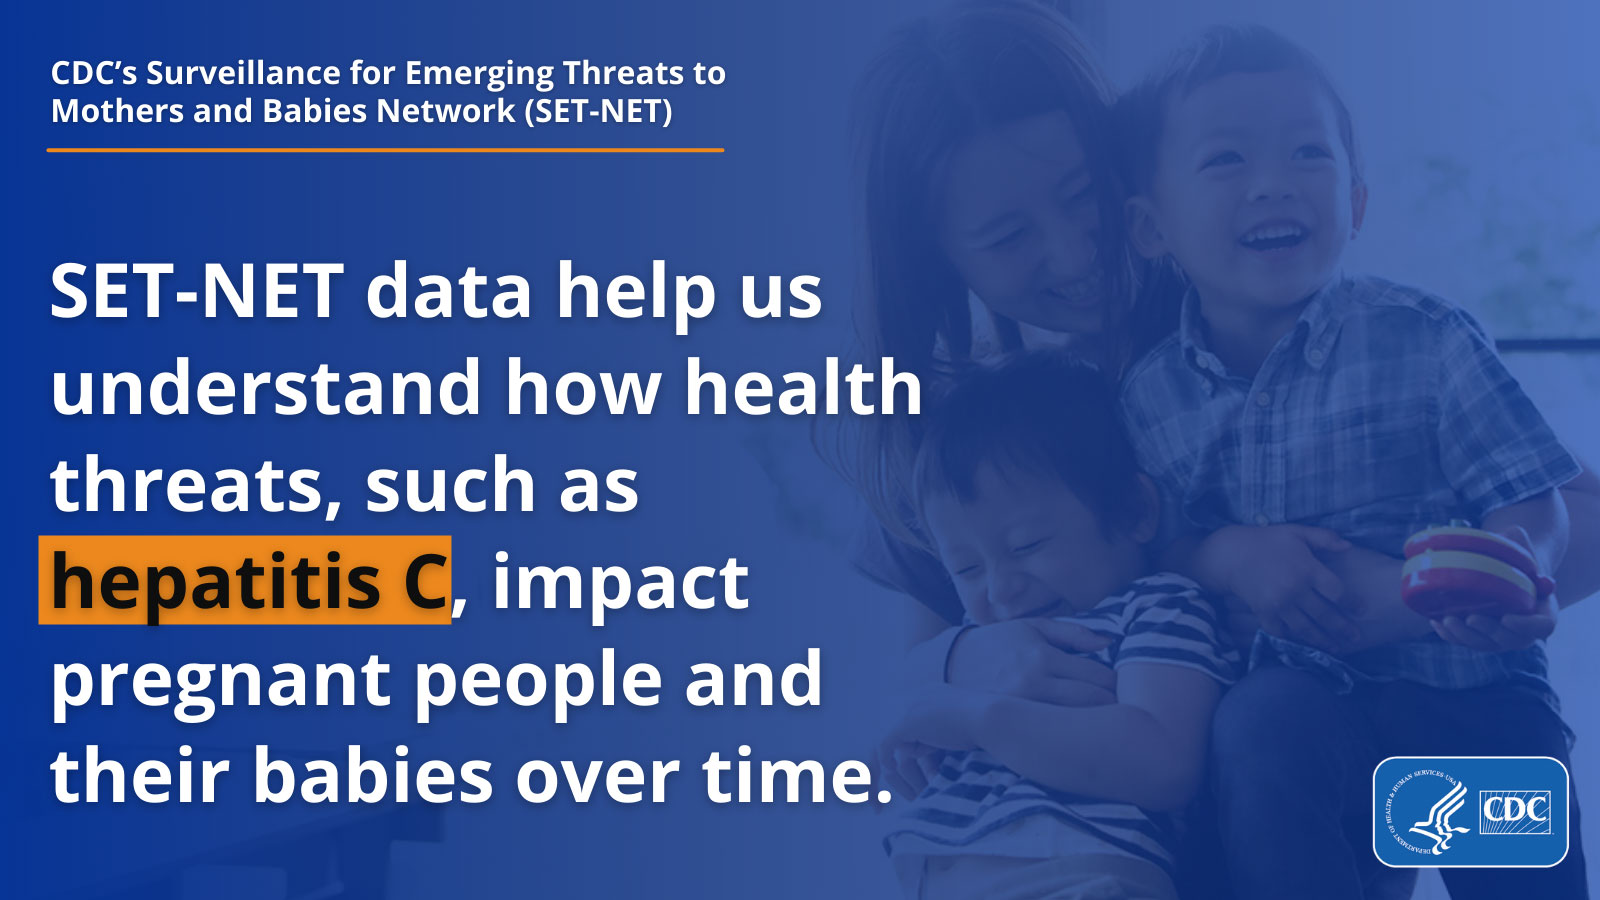 SET-NET data help us understand how health threats, such as hepatitis C, impact pregnant people and their babies over time.